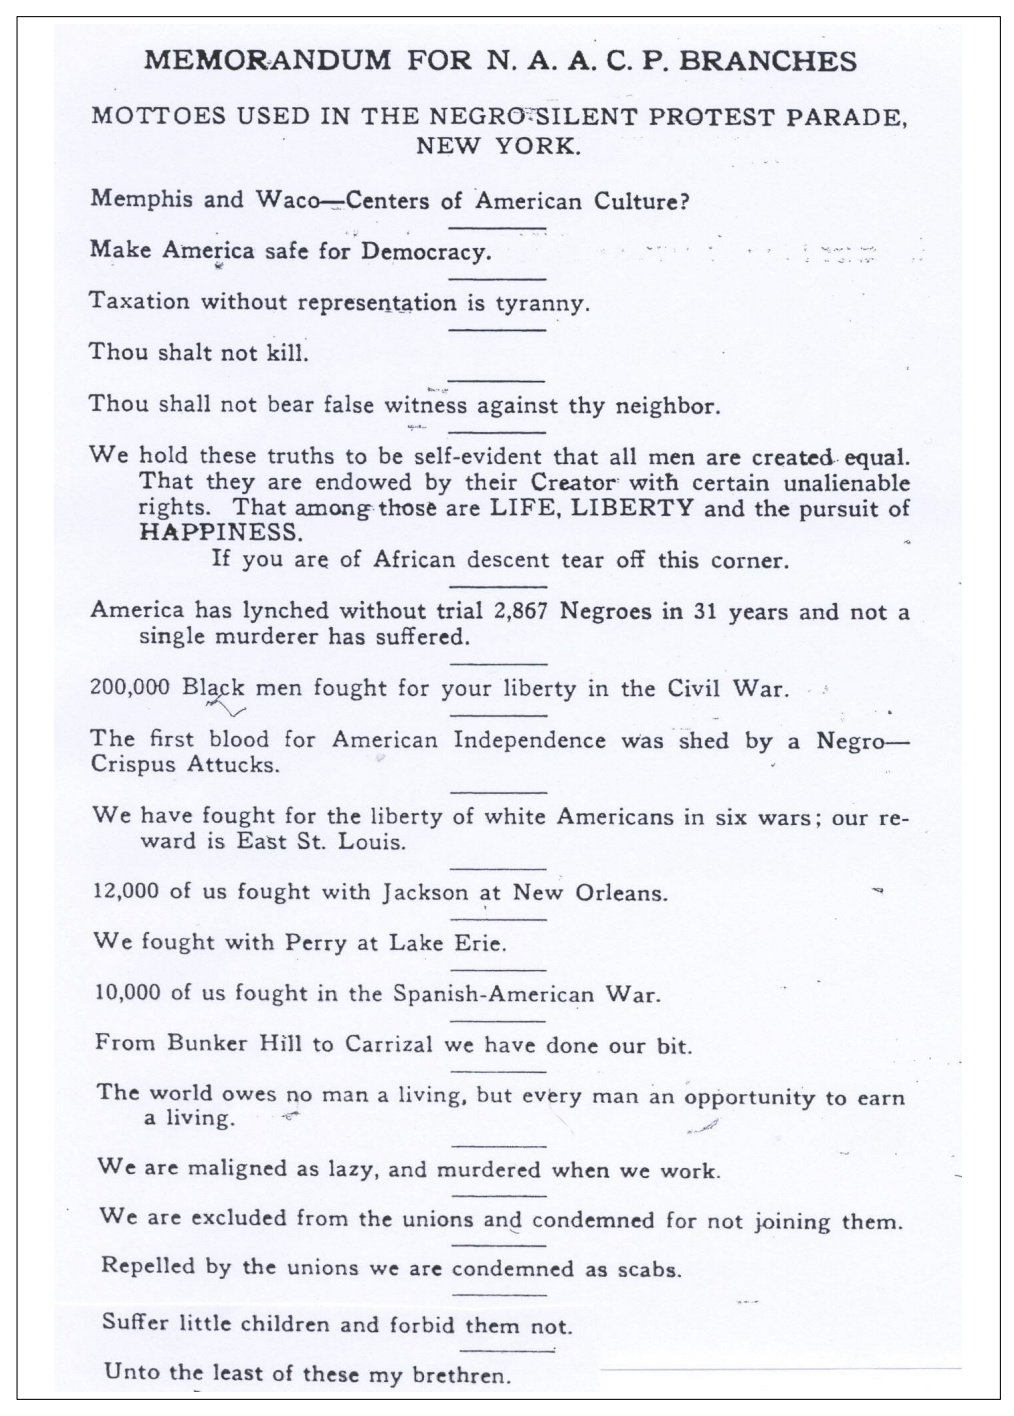 NAACP Silent Protest Parade, memo, July 1917; Part 1